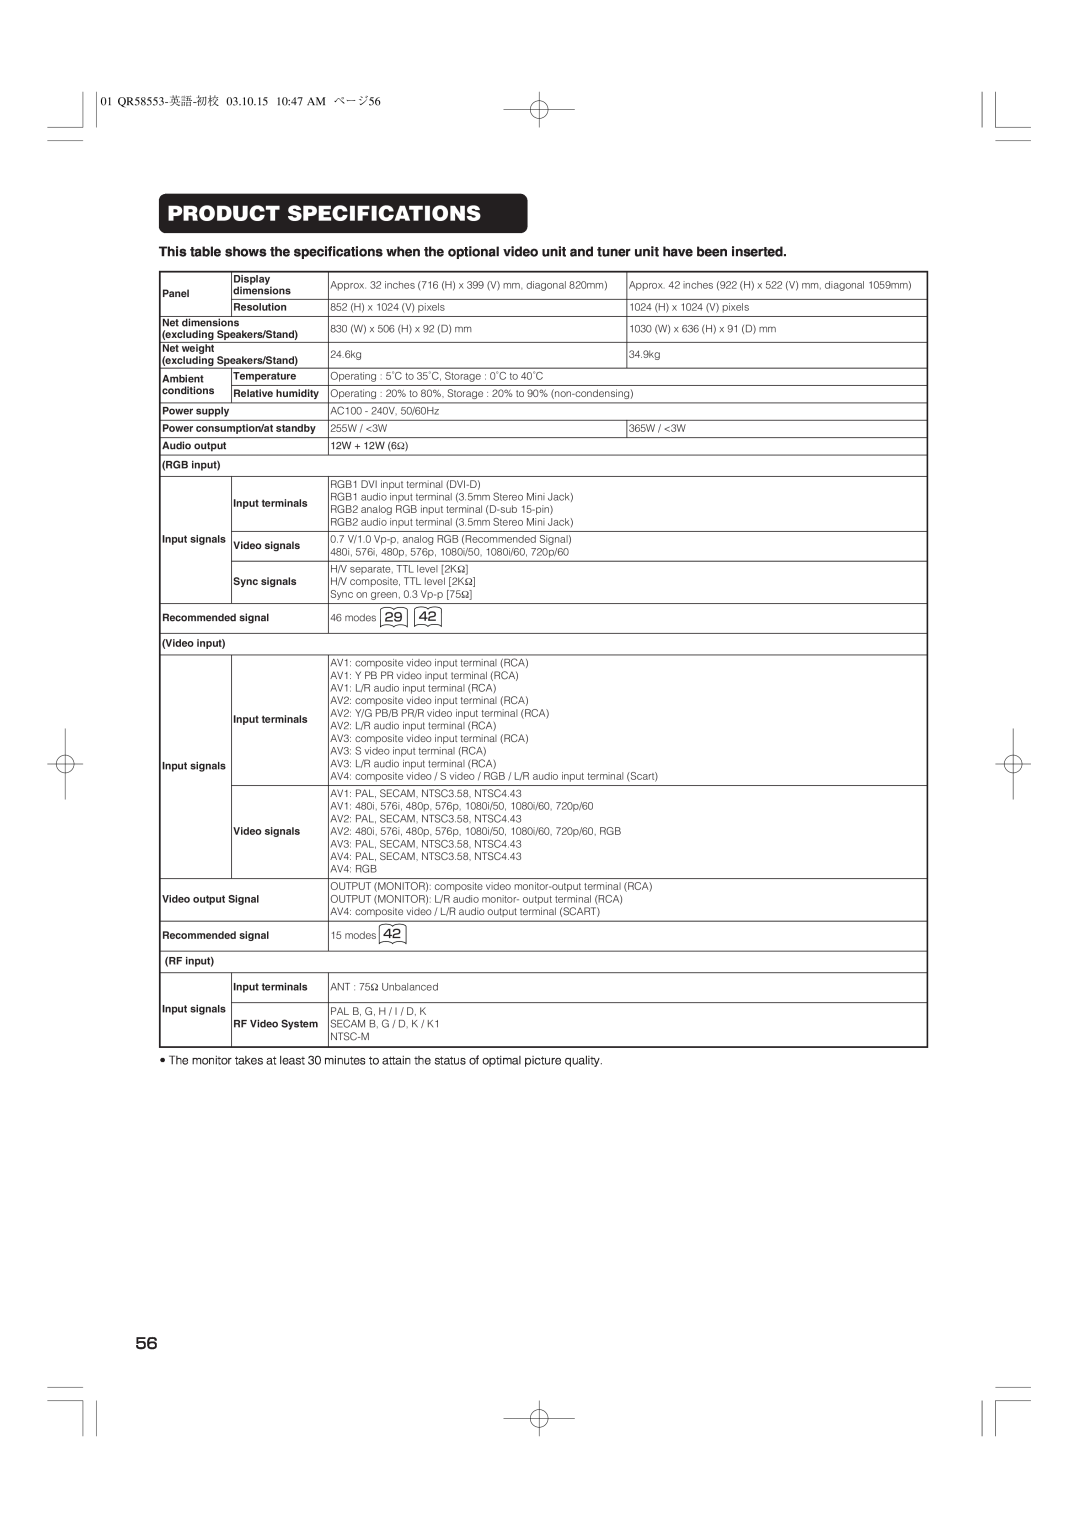 Hitachi 42PD5000 user manual Product Specifications, 01 QR58553-英語-初校 03.10.15 1047 AM ページ56 